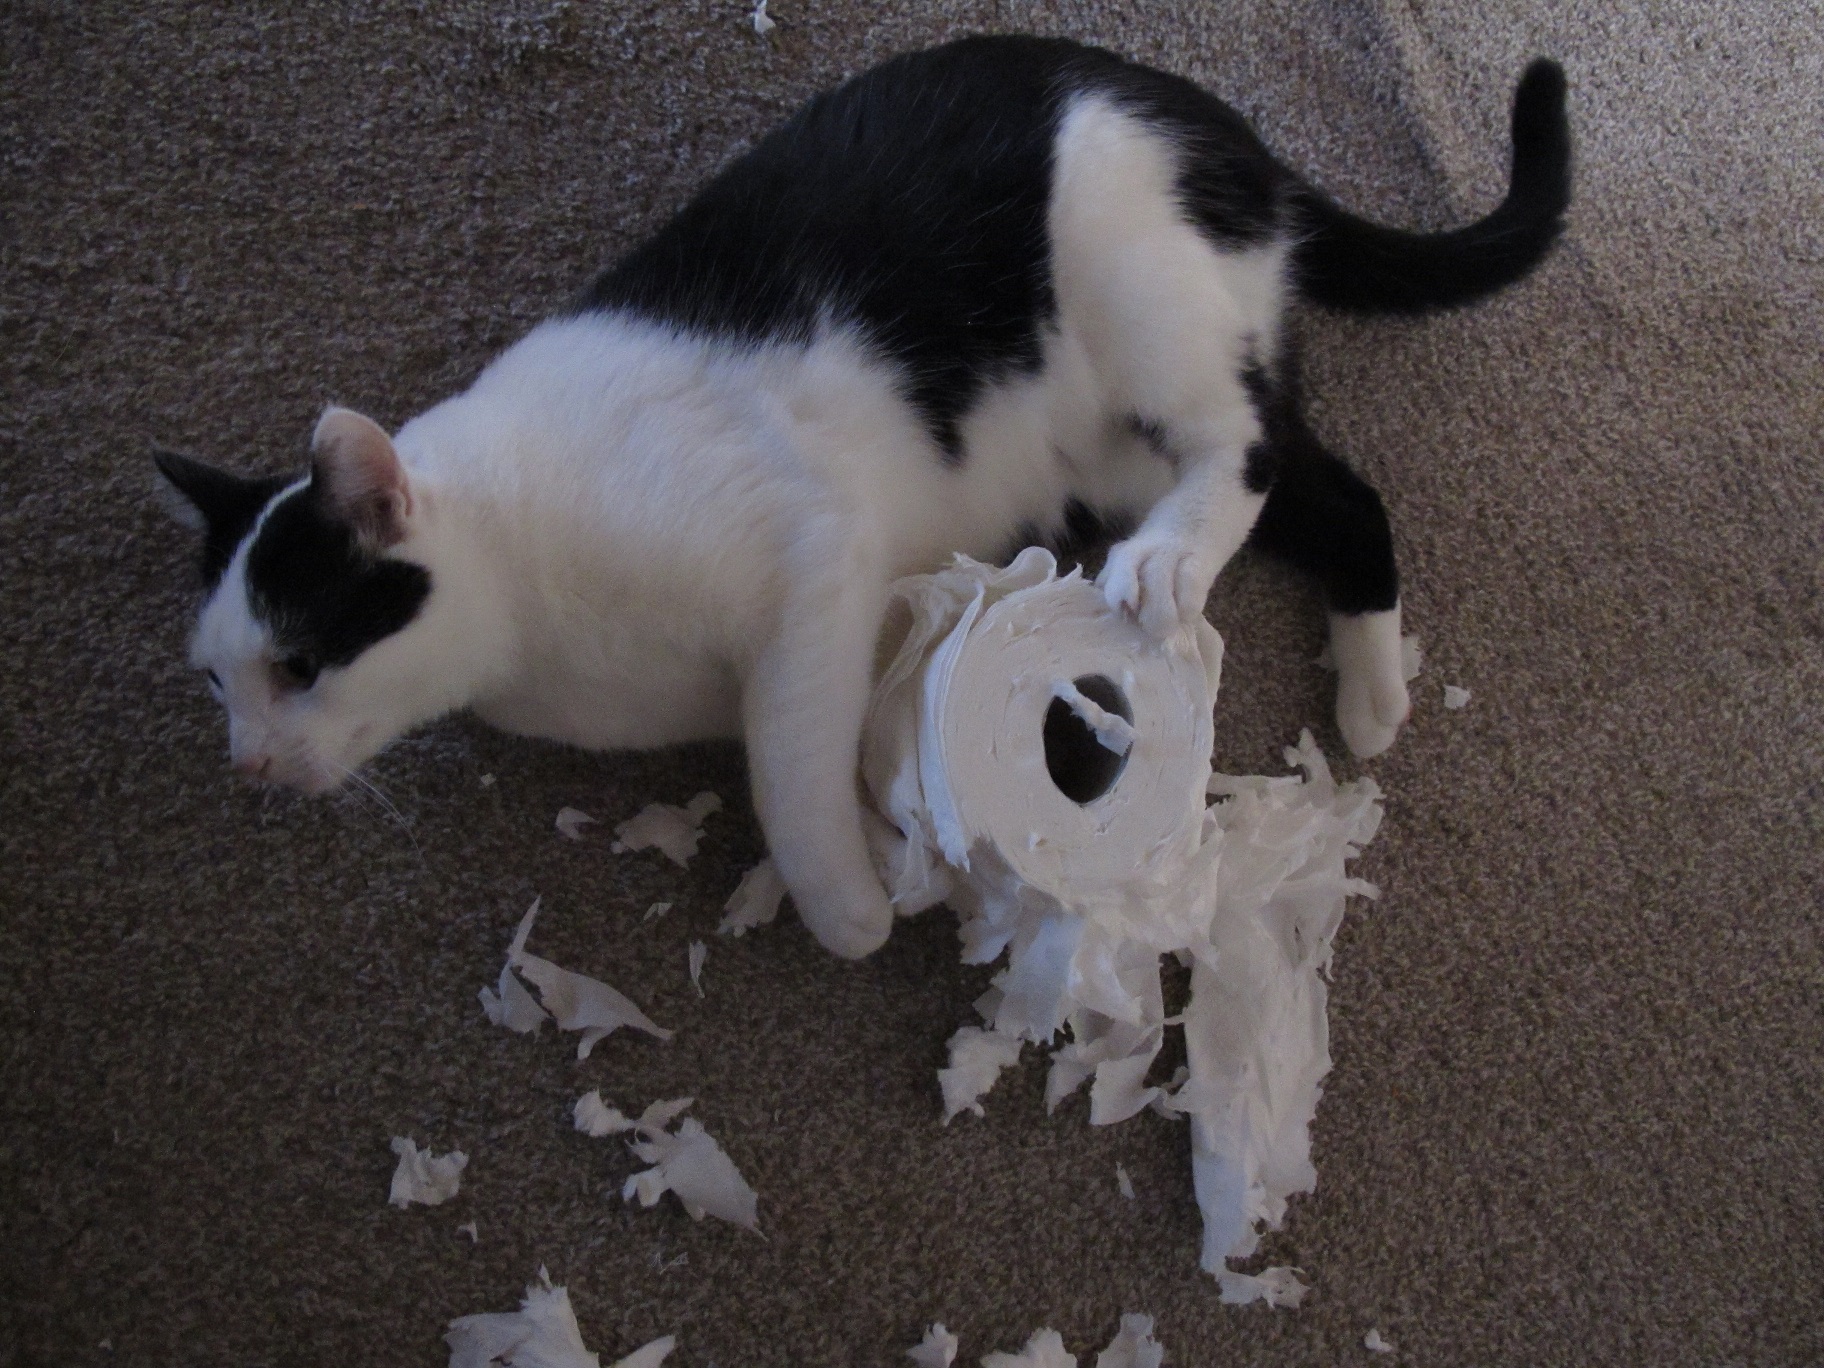 And I even laugh when bad things happen. TB found a roll of toilet paper and had a ball! I let him go while I took pictures and that was the last time TP was in his reach.